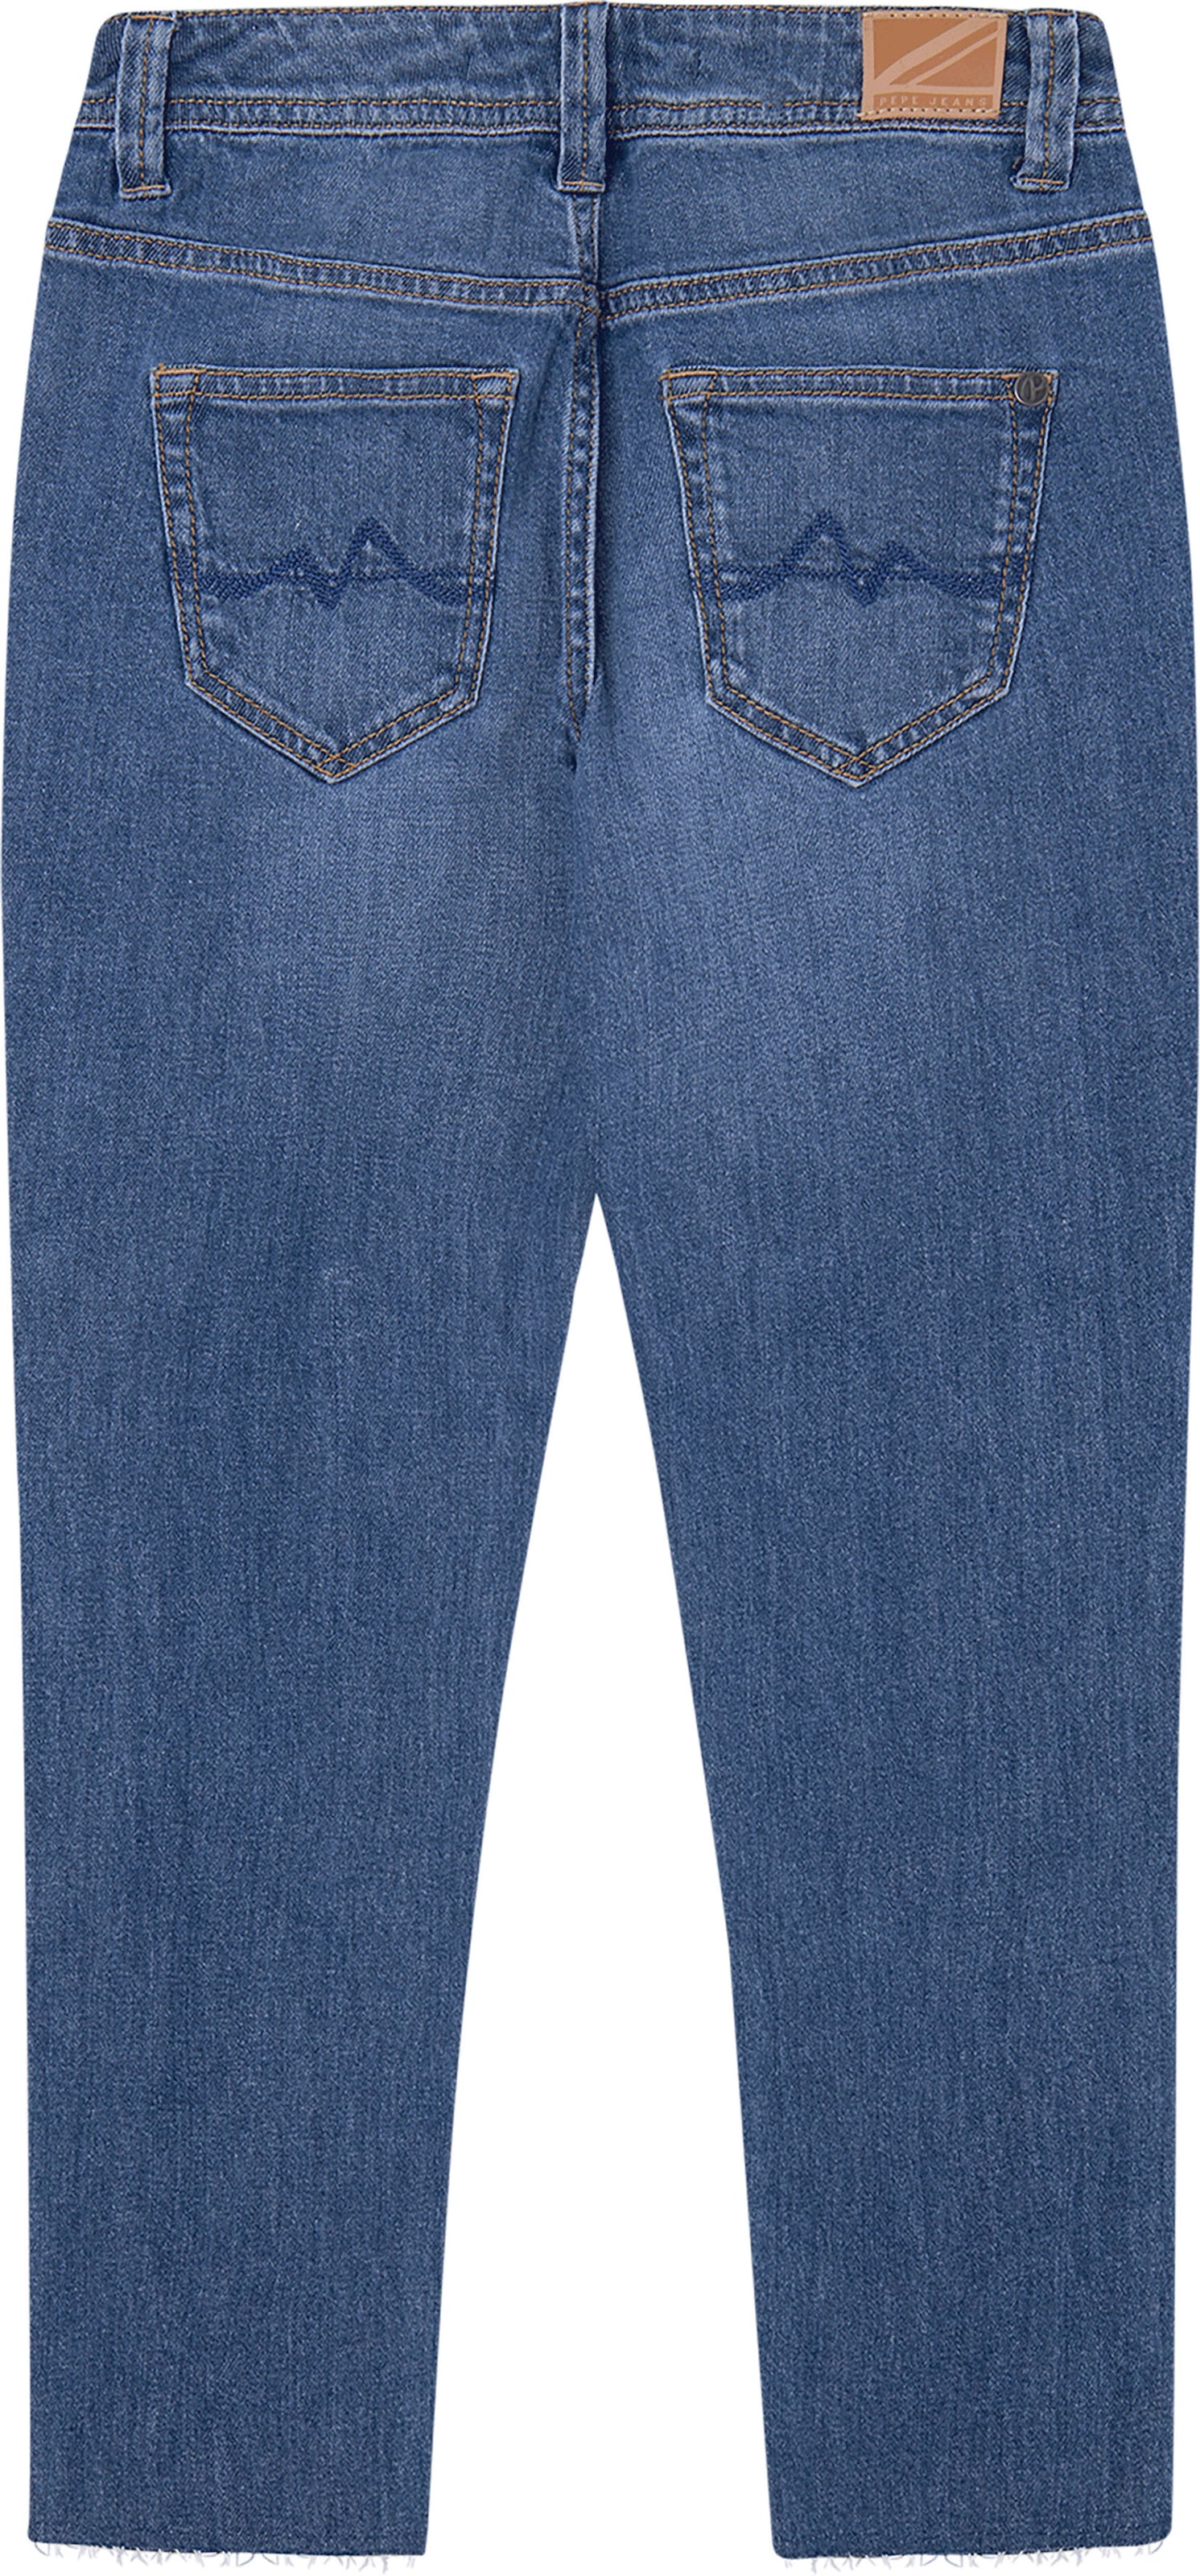 Pepe Jeans 5-Pocket-Jeans »Violet« online bei OTTO